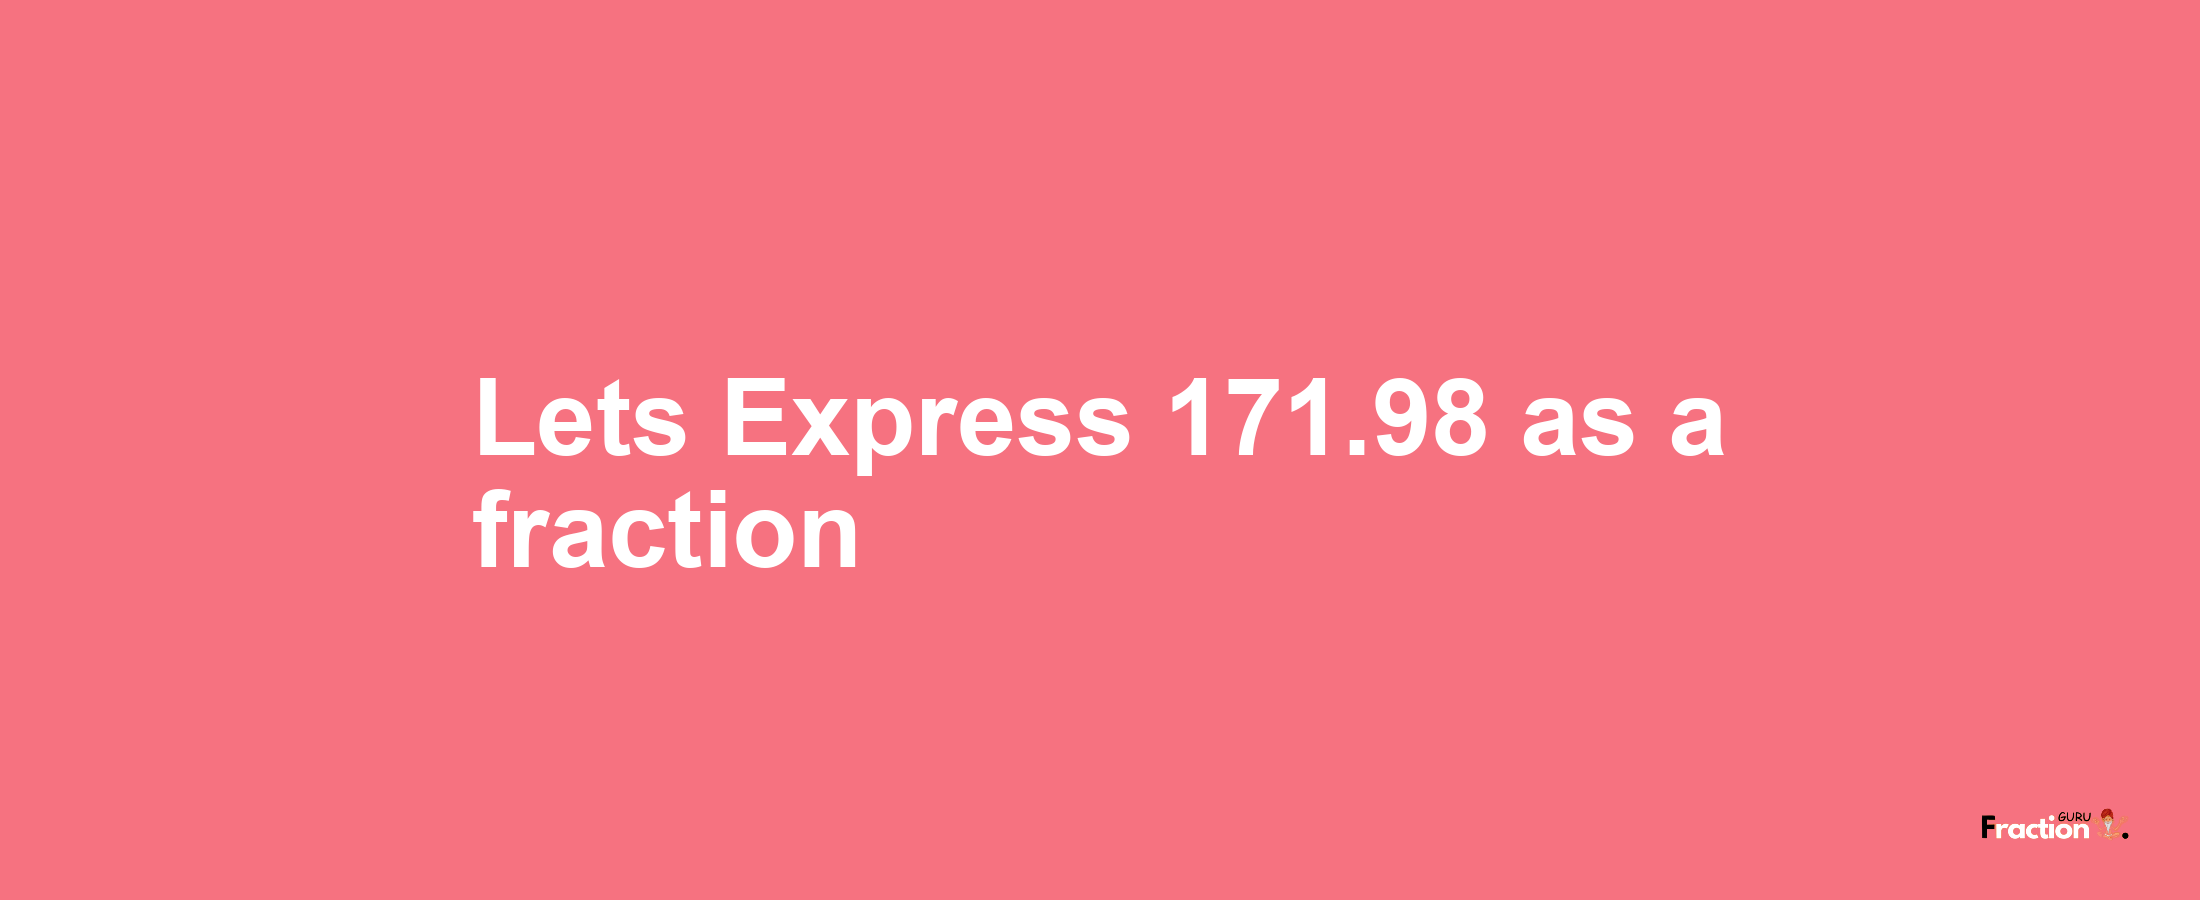 Lets Express 171.98 as afraction